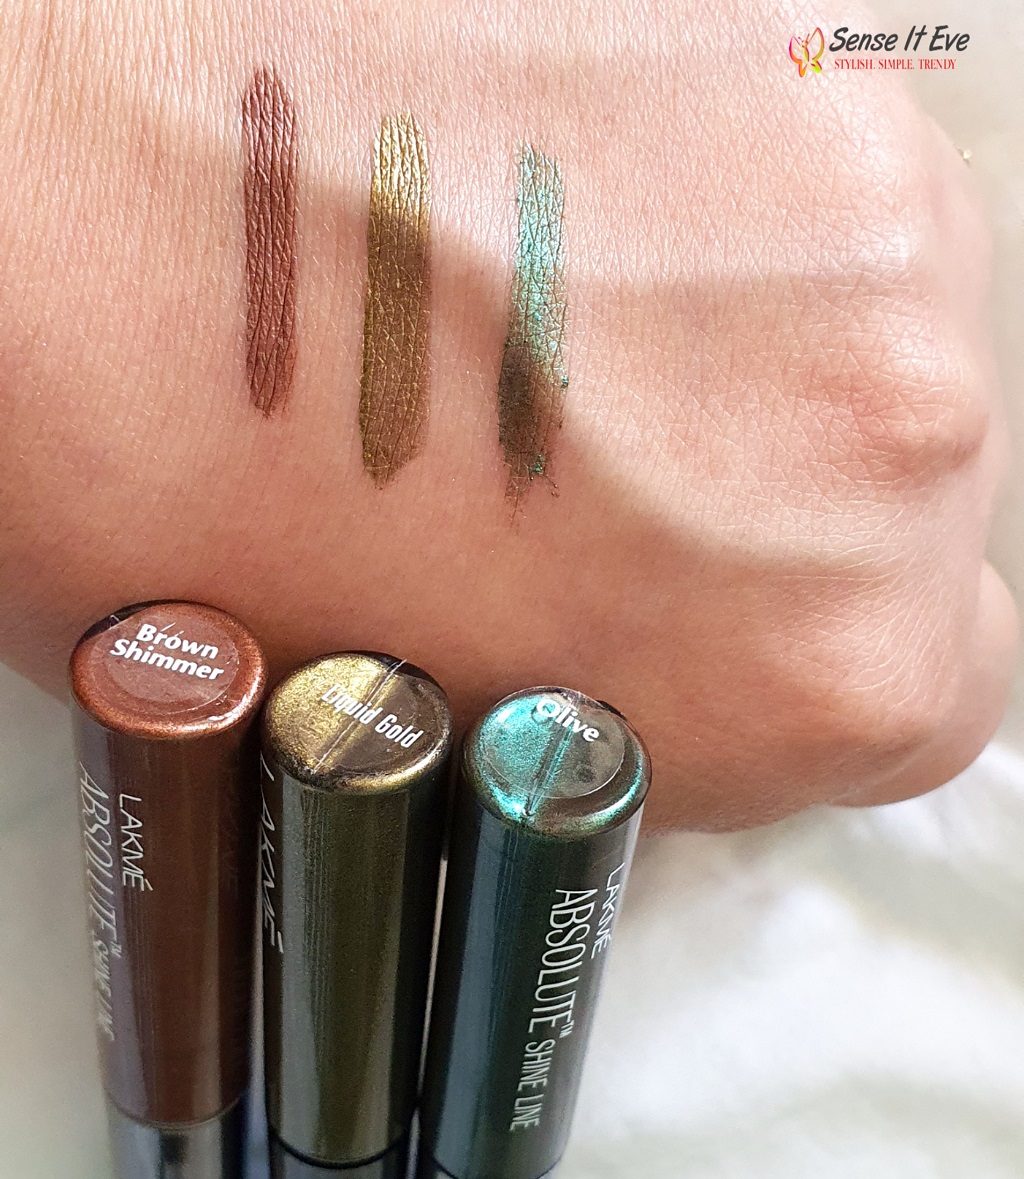 Lakme Absolute Shine Line colored EyeLiners Sense It Eve Lakme Absolute Shine Line Eye Liners : Review & Swatches